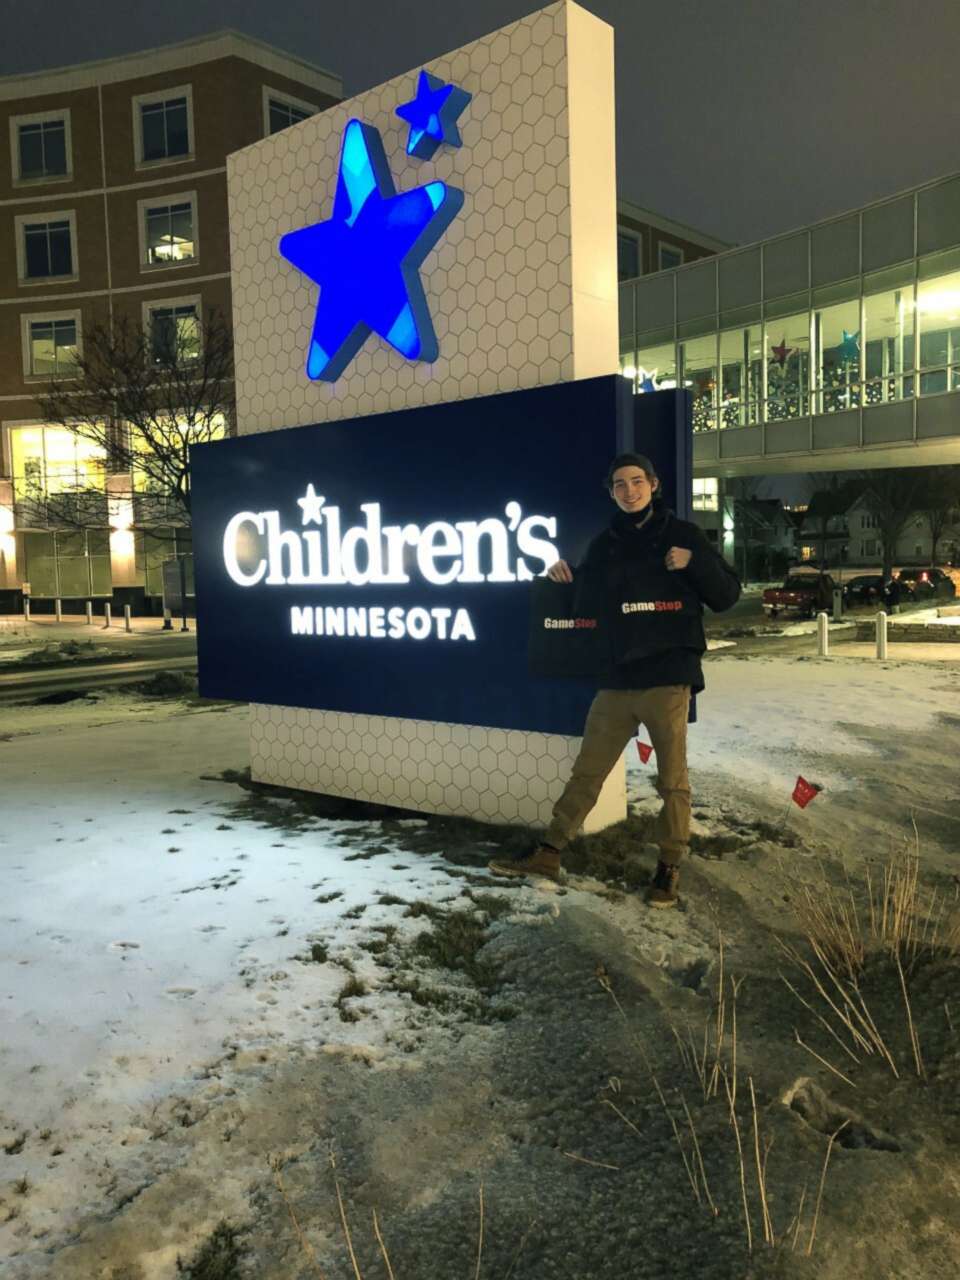 PHOTO: Hunter Kahn, a 20-year-old college student from Minnesota, was among the renegade investor group that scored big by buying stock in GameStop and using some of his returns to buy Nintendo games for Children's Hospital in Minneapolis. 